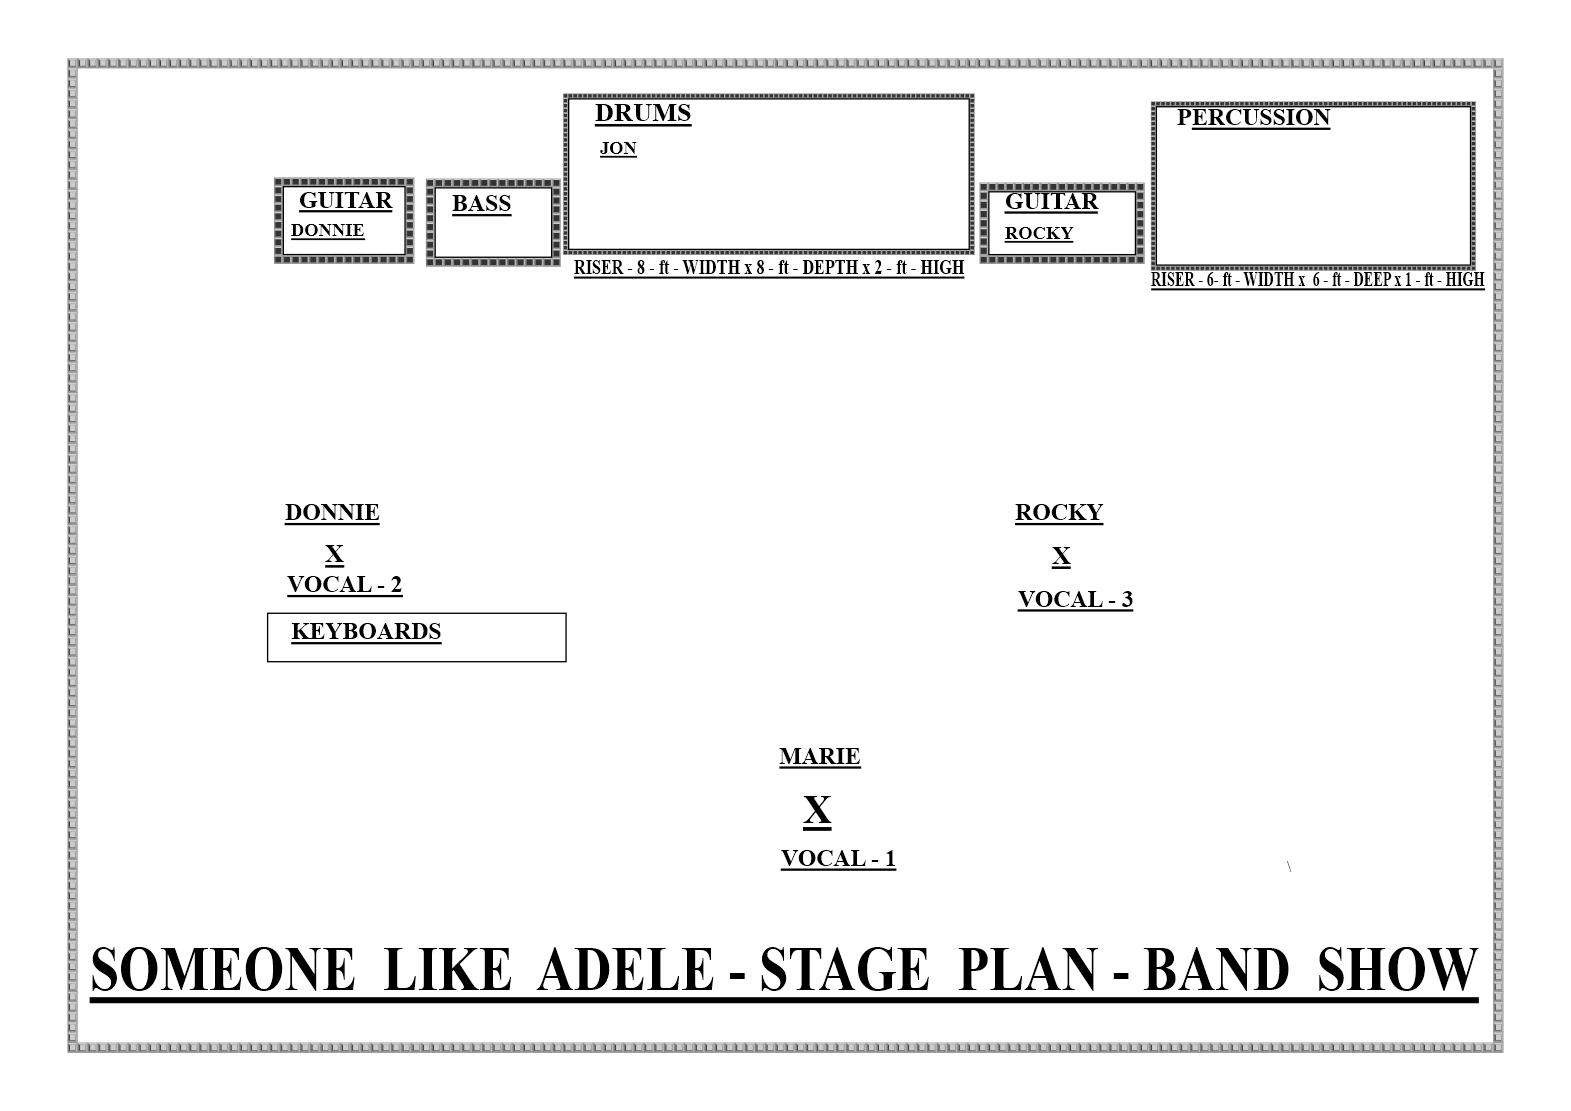 STAGE PLAN - BAND SHOW